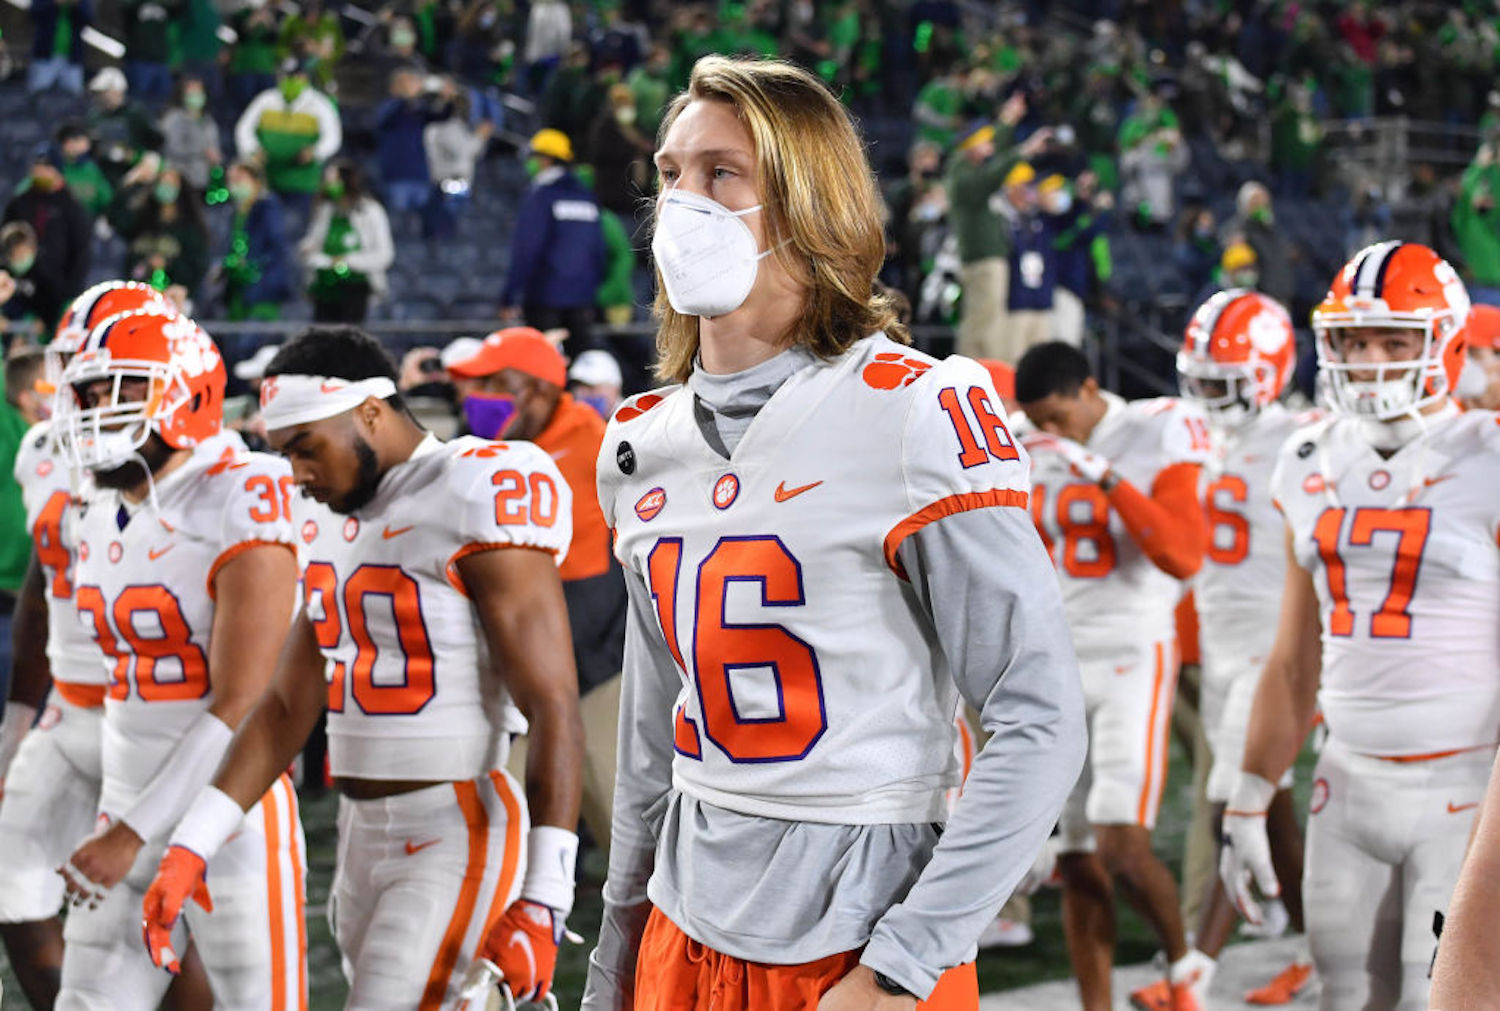 Clemson suffered a heartbreaking loss on Saturday night in South Bend, but they still have a path to the College Football Playoff in 2021.